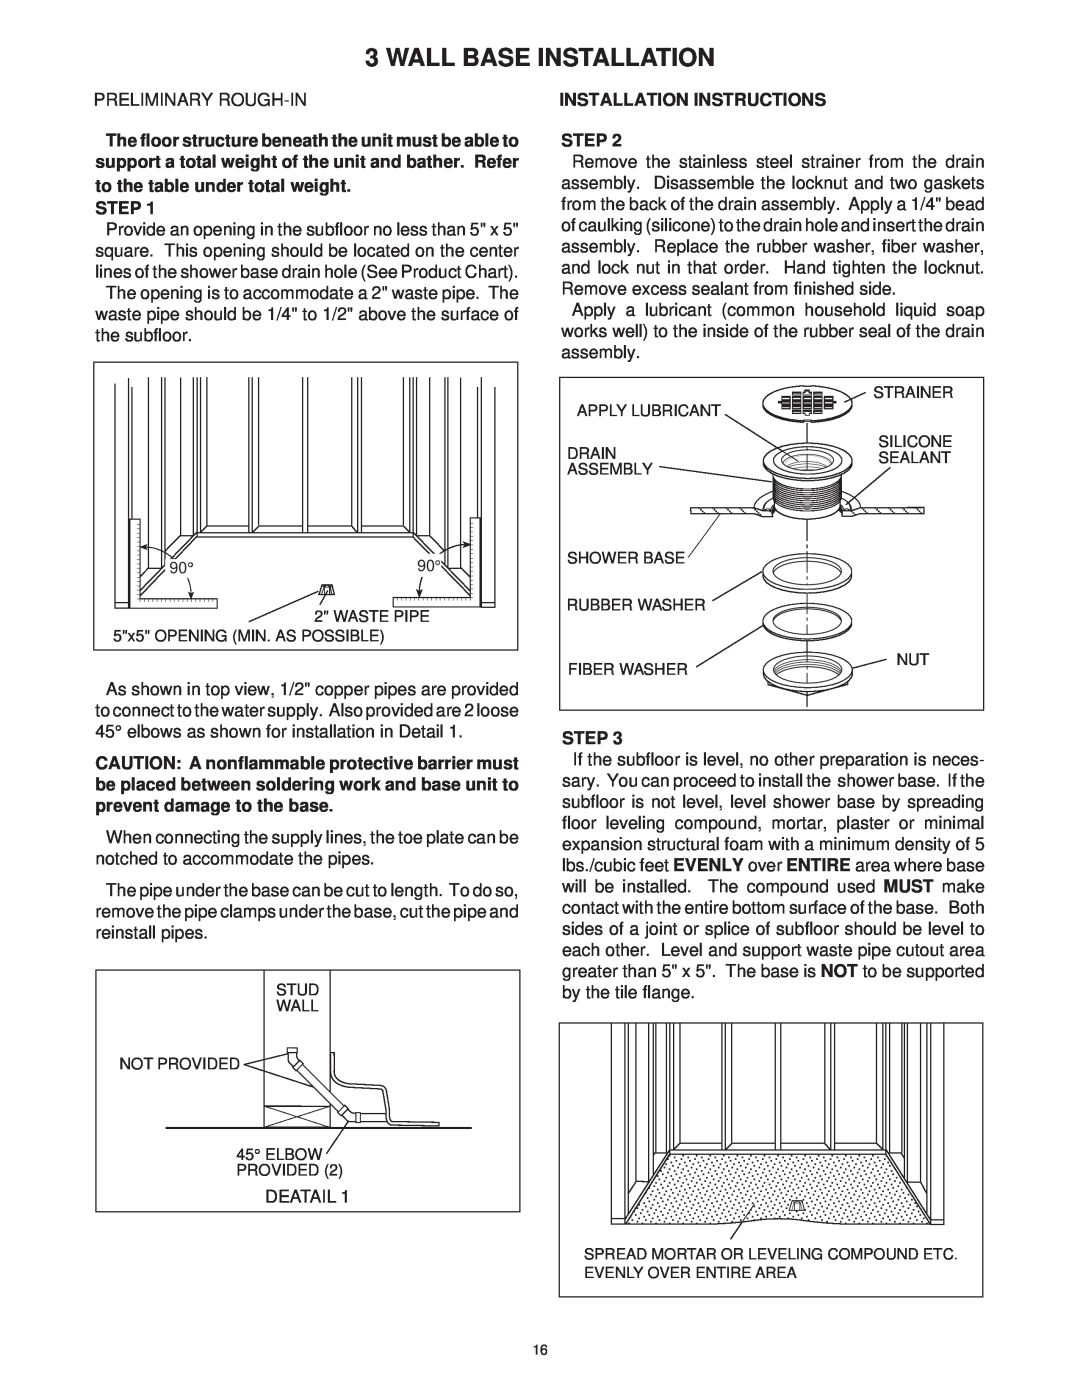 Jacuzzi SUMMER RAINTM 2 WALL & 3 WALL WALK-IN SHOWER SYSTEMS Wall Base Installation, Installation Instructions Step 